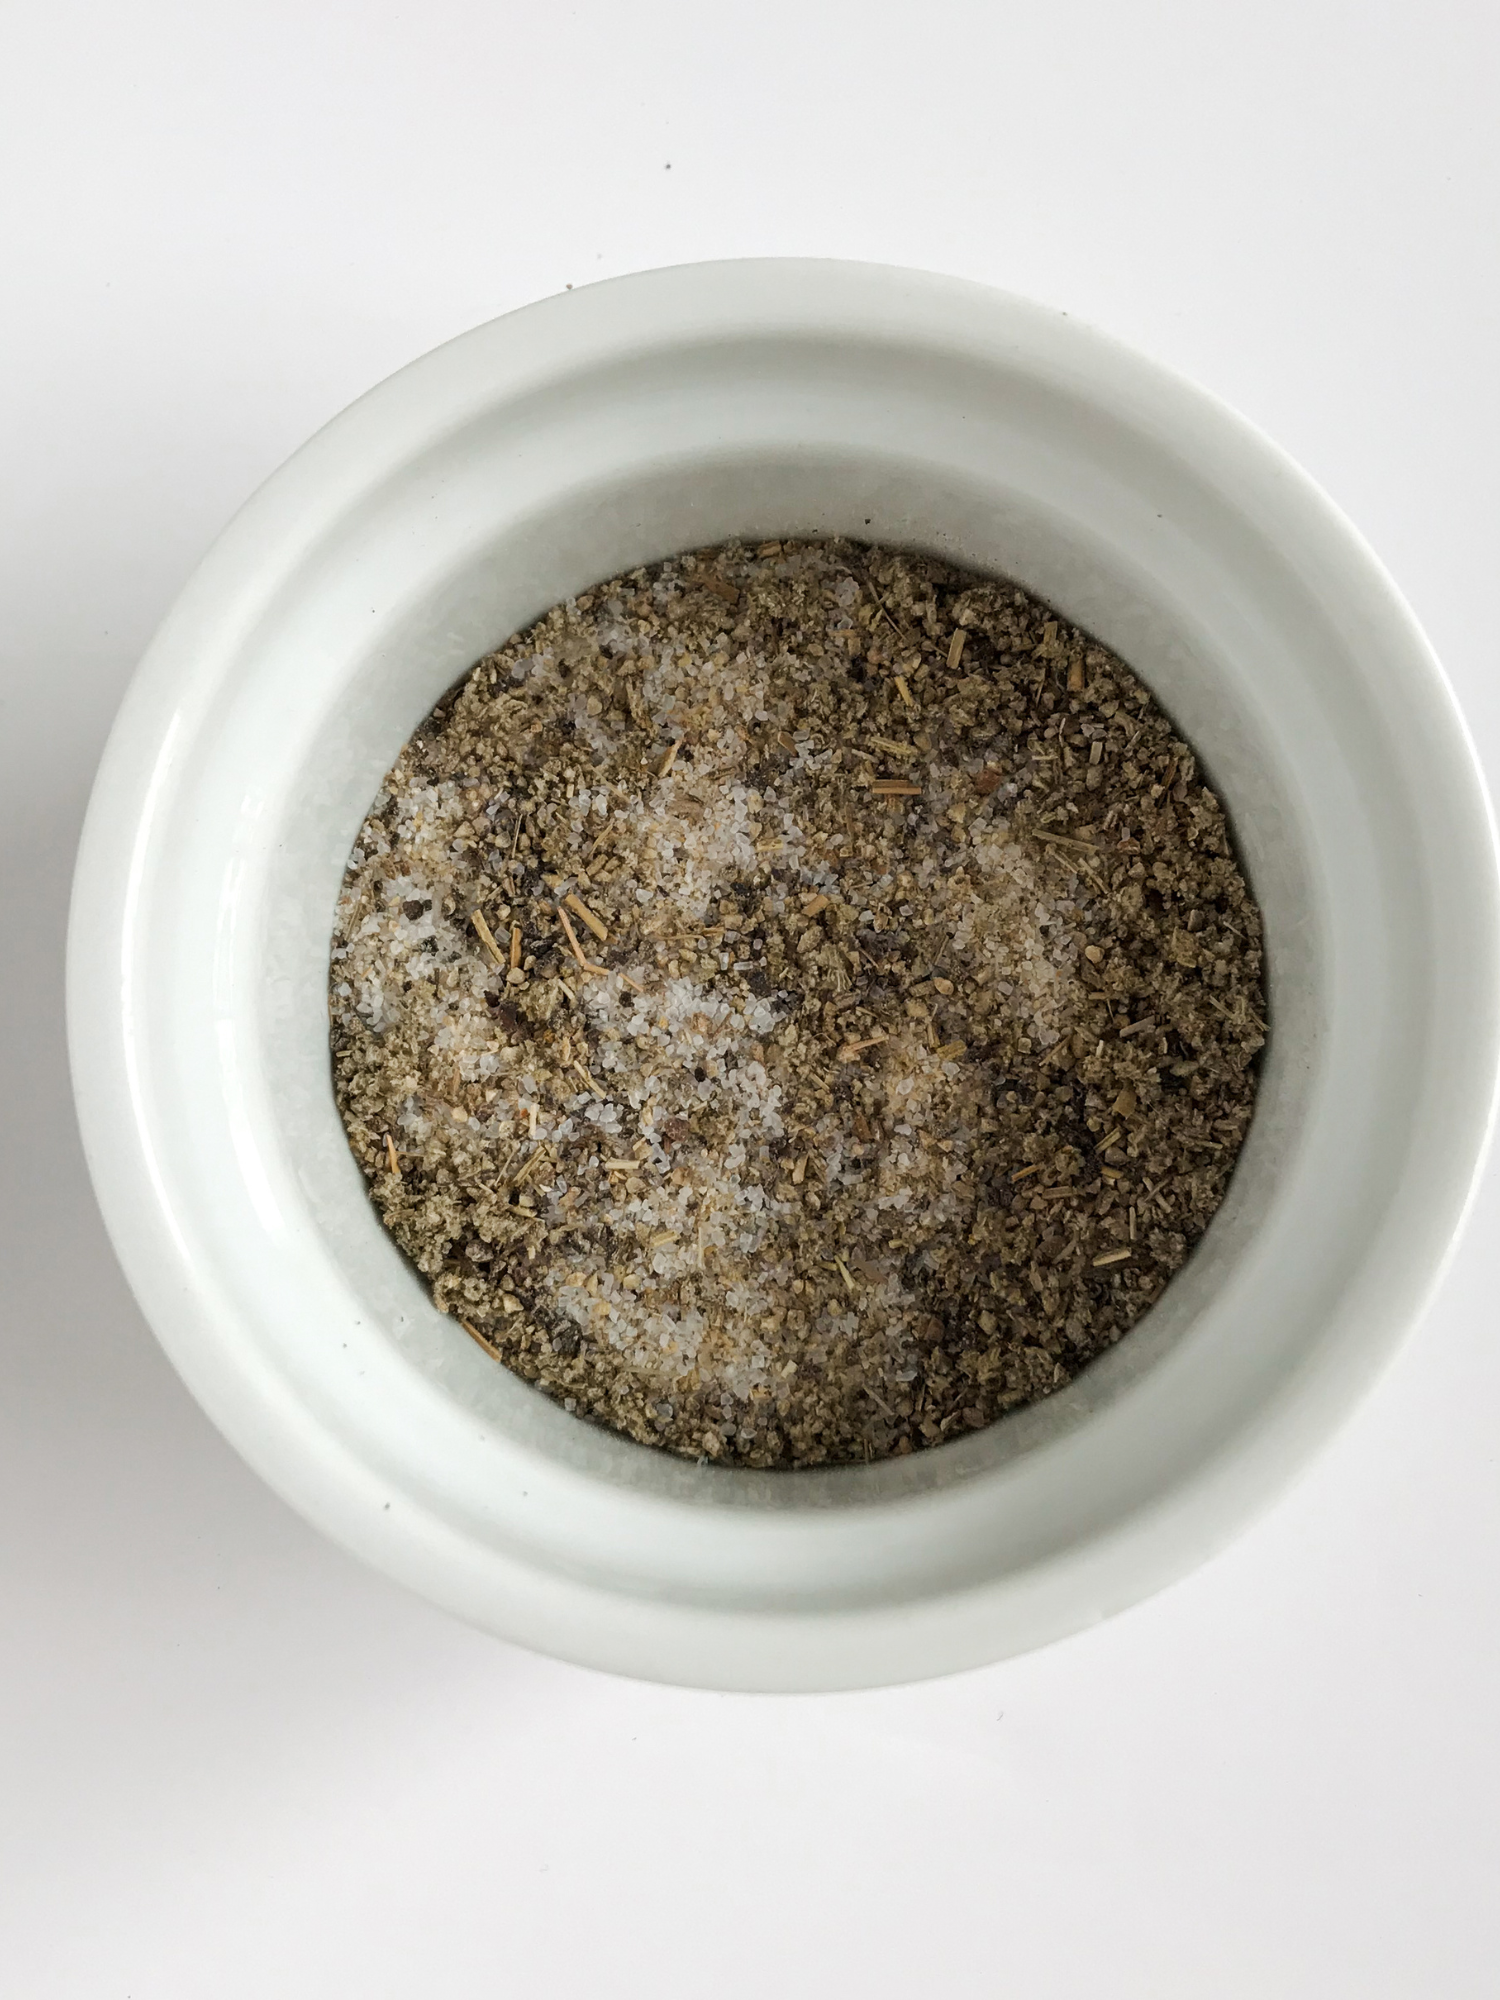 a small white bowl filled with spices like Dried Oregano, Rubbed Sage, Celery Salt, Dried Marjoram, Salt, Onion and Garlic Powder mixed together